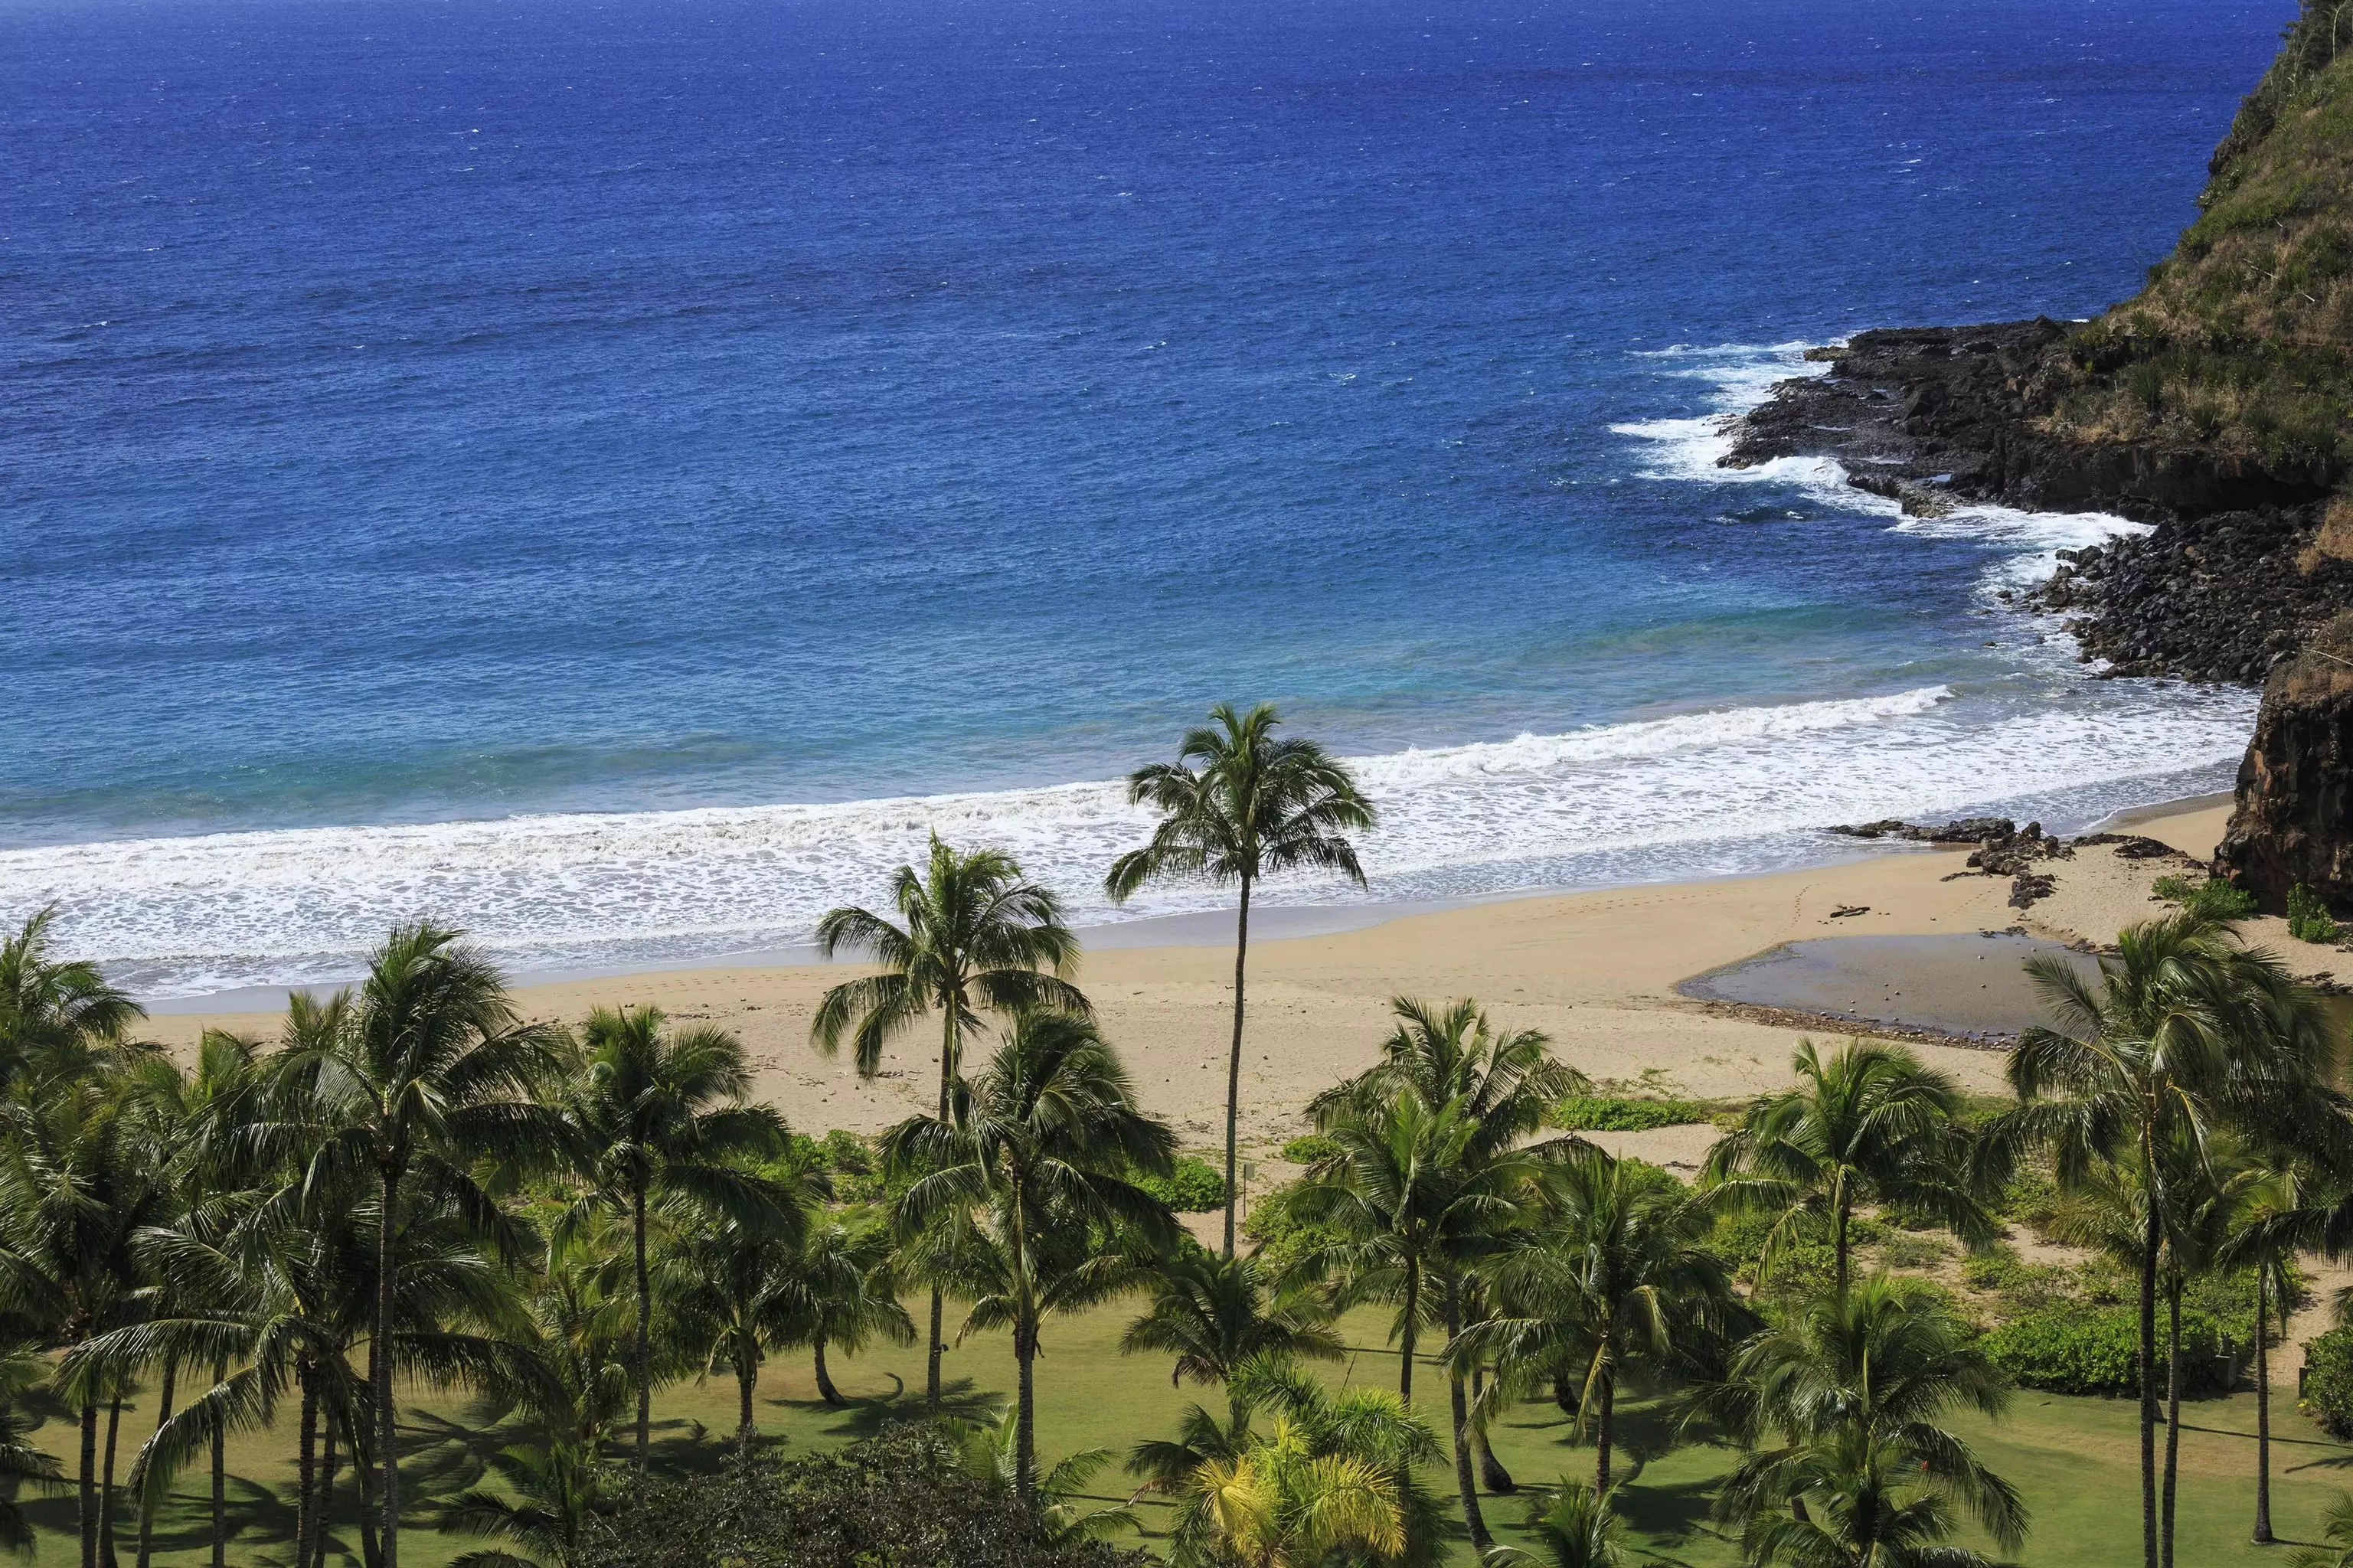 Hawaii is one of the most-anticipated Disney destinations (